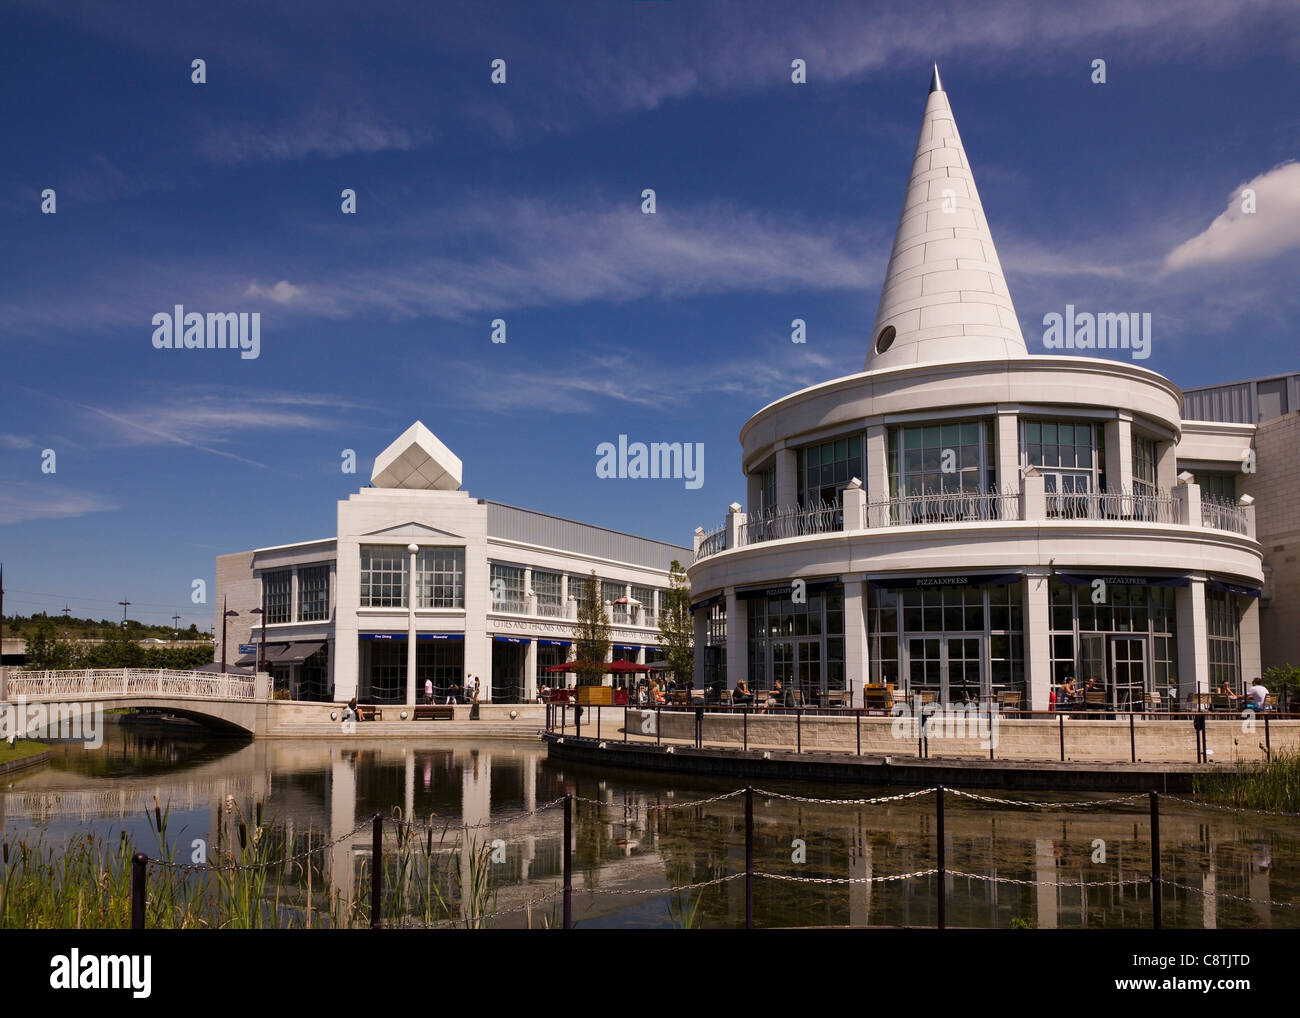 Pizza Express Restaurant by lake at Bluewater shopping centre, Greenhithe, Kent, England, UK Stock Photo